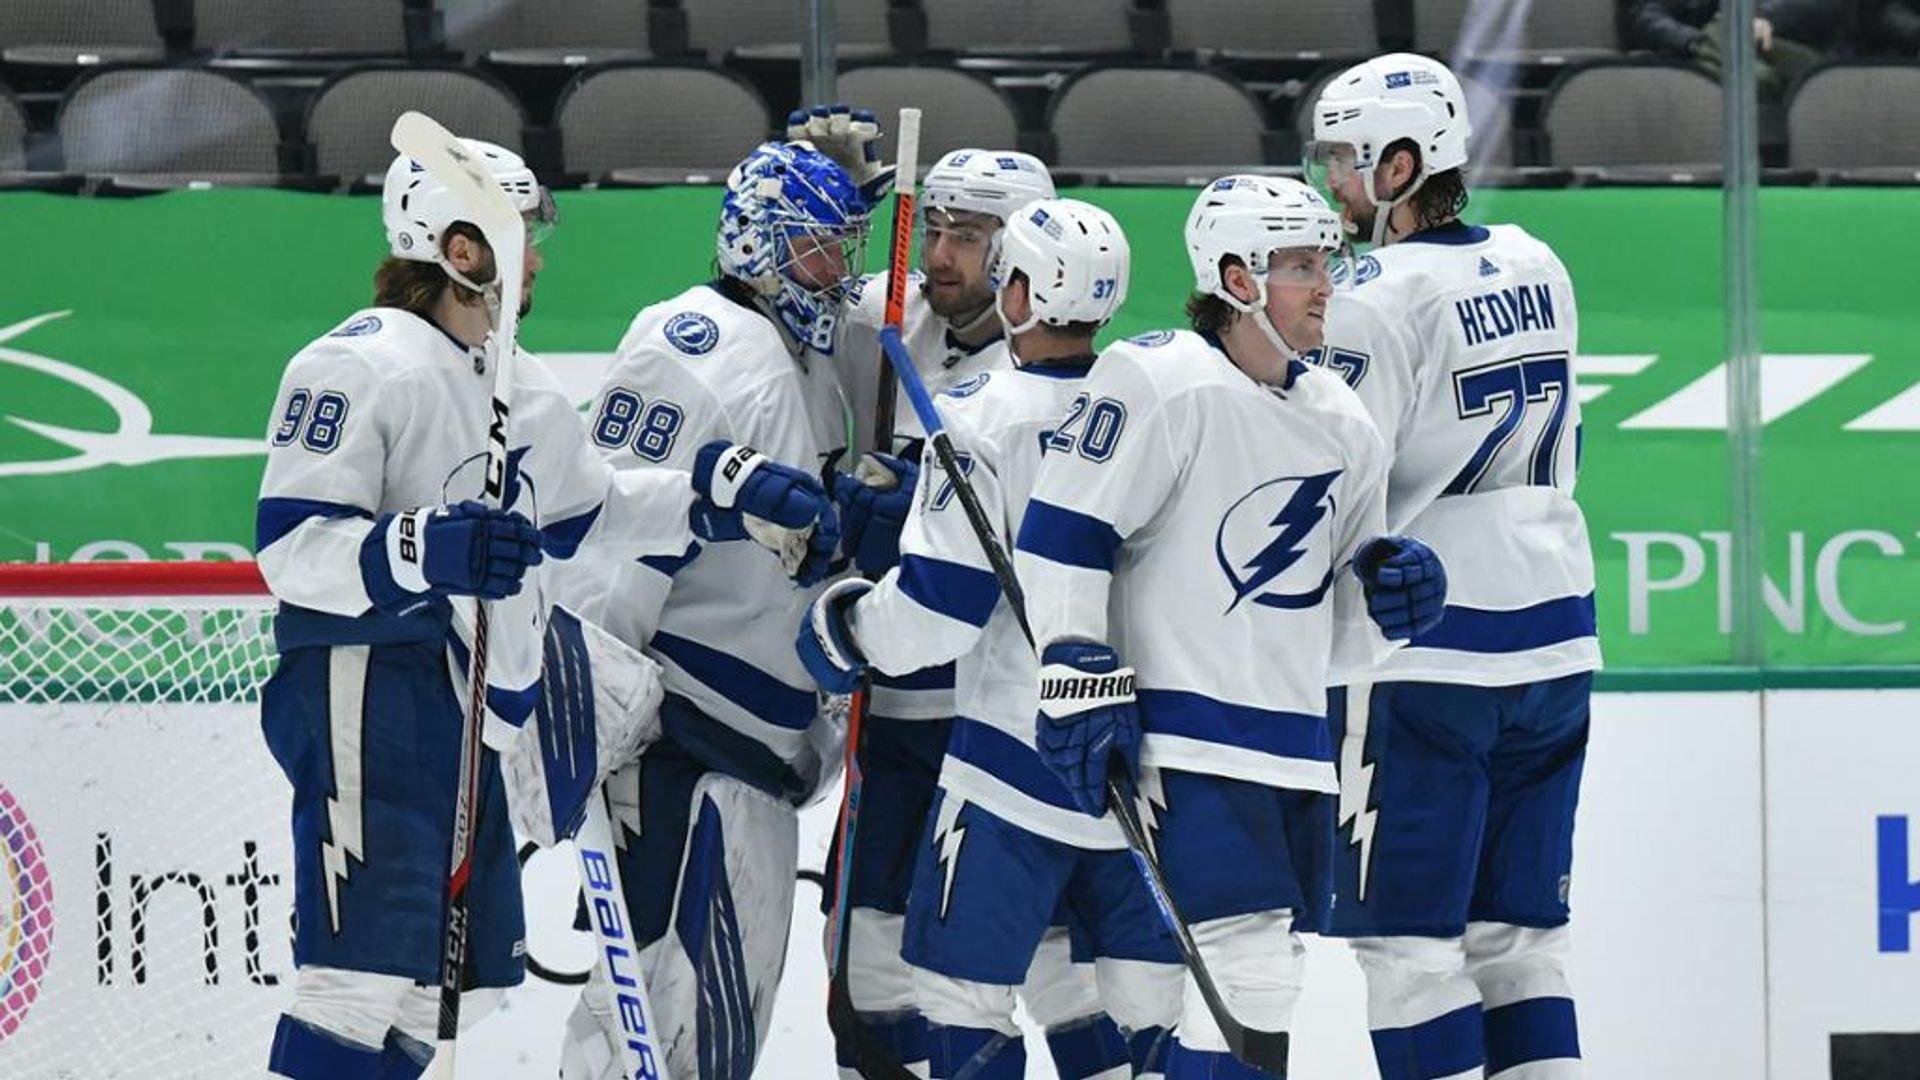 Hedman will lead his Lightning team in a revenge game